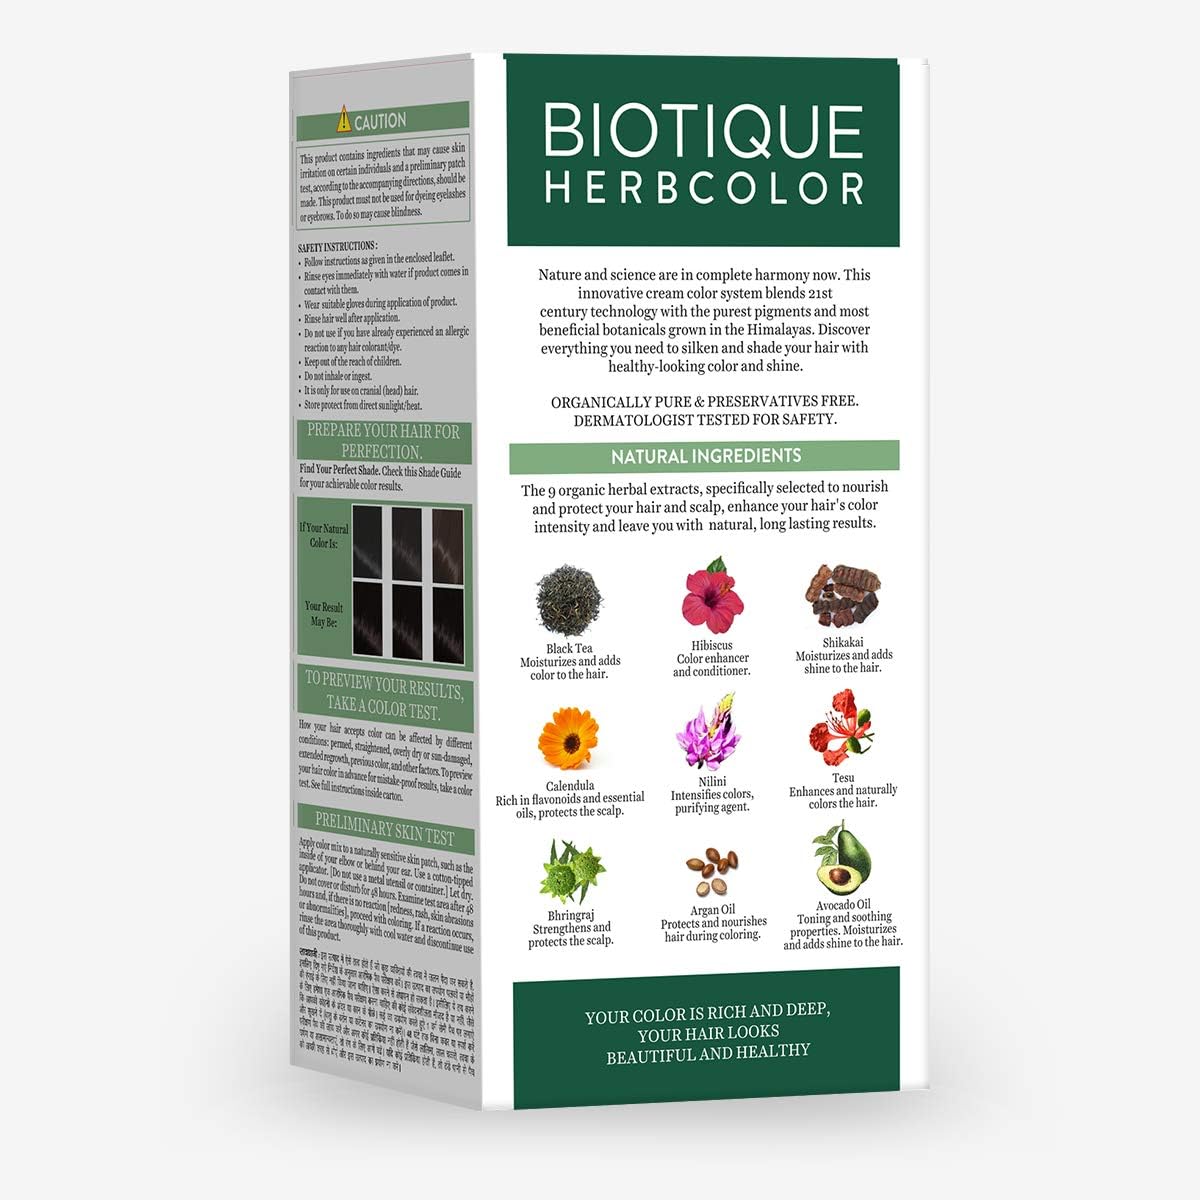 Biotique Bio Herbcolor 3N Darkest Brown Hair Color, 100% Grey Cover, With 9 Organic Herbal Extracts, 50g+110ml